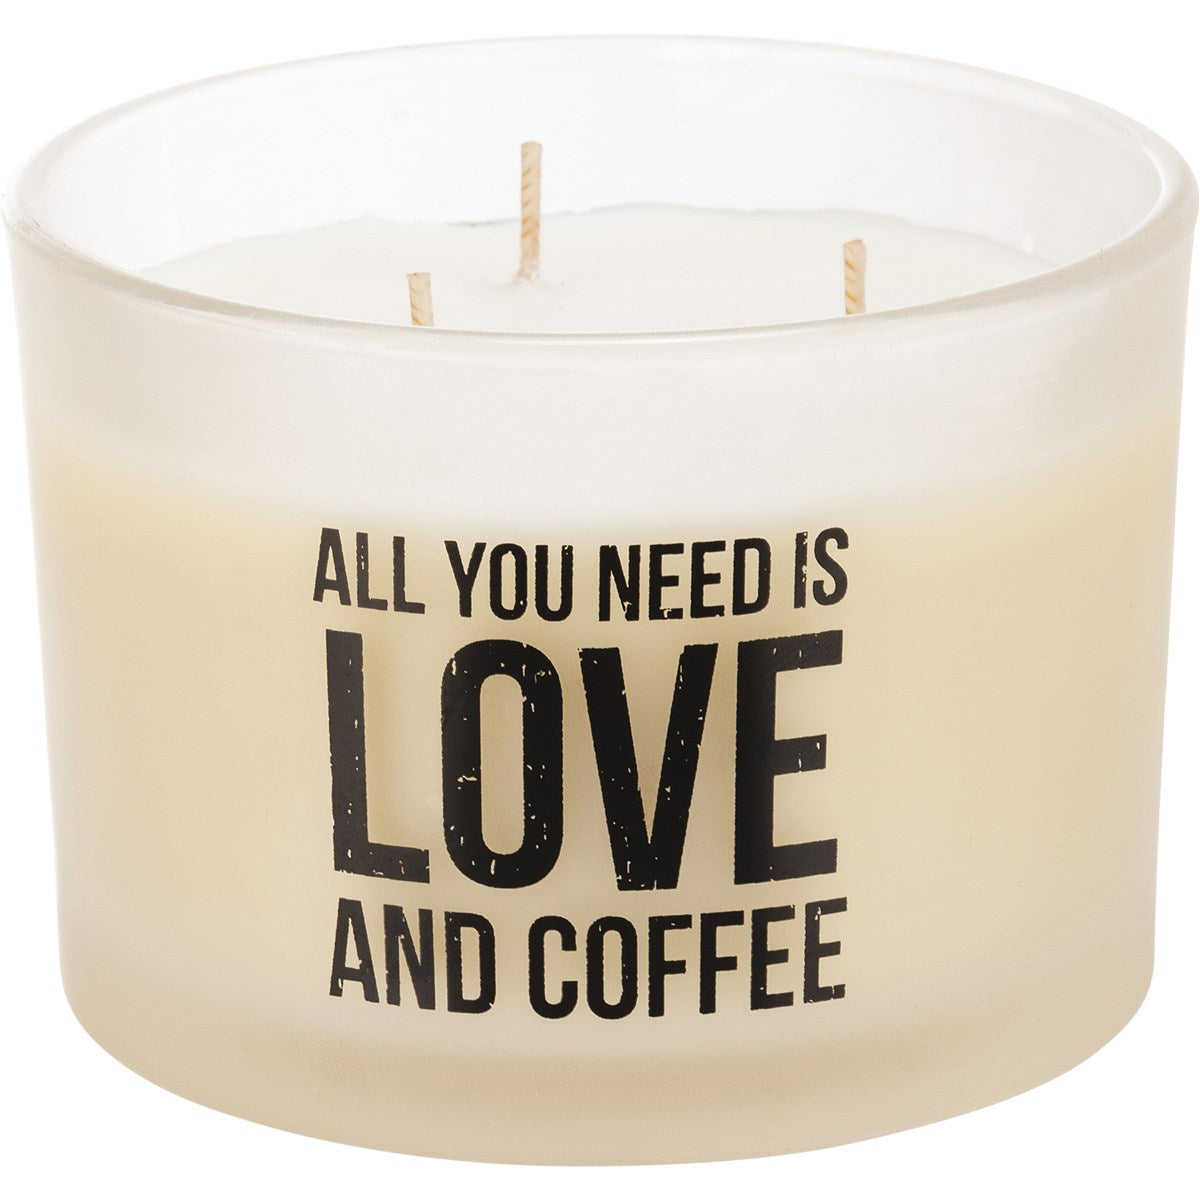 All you need is love Jar candle